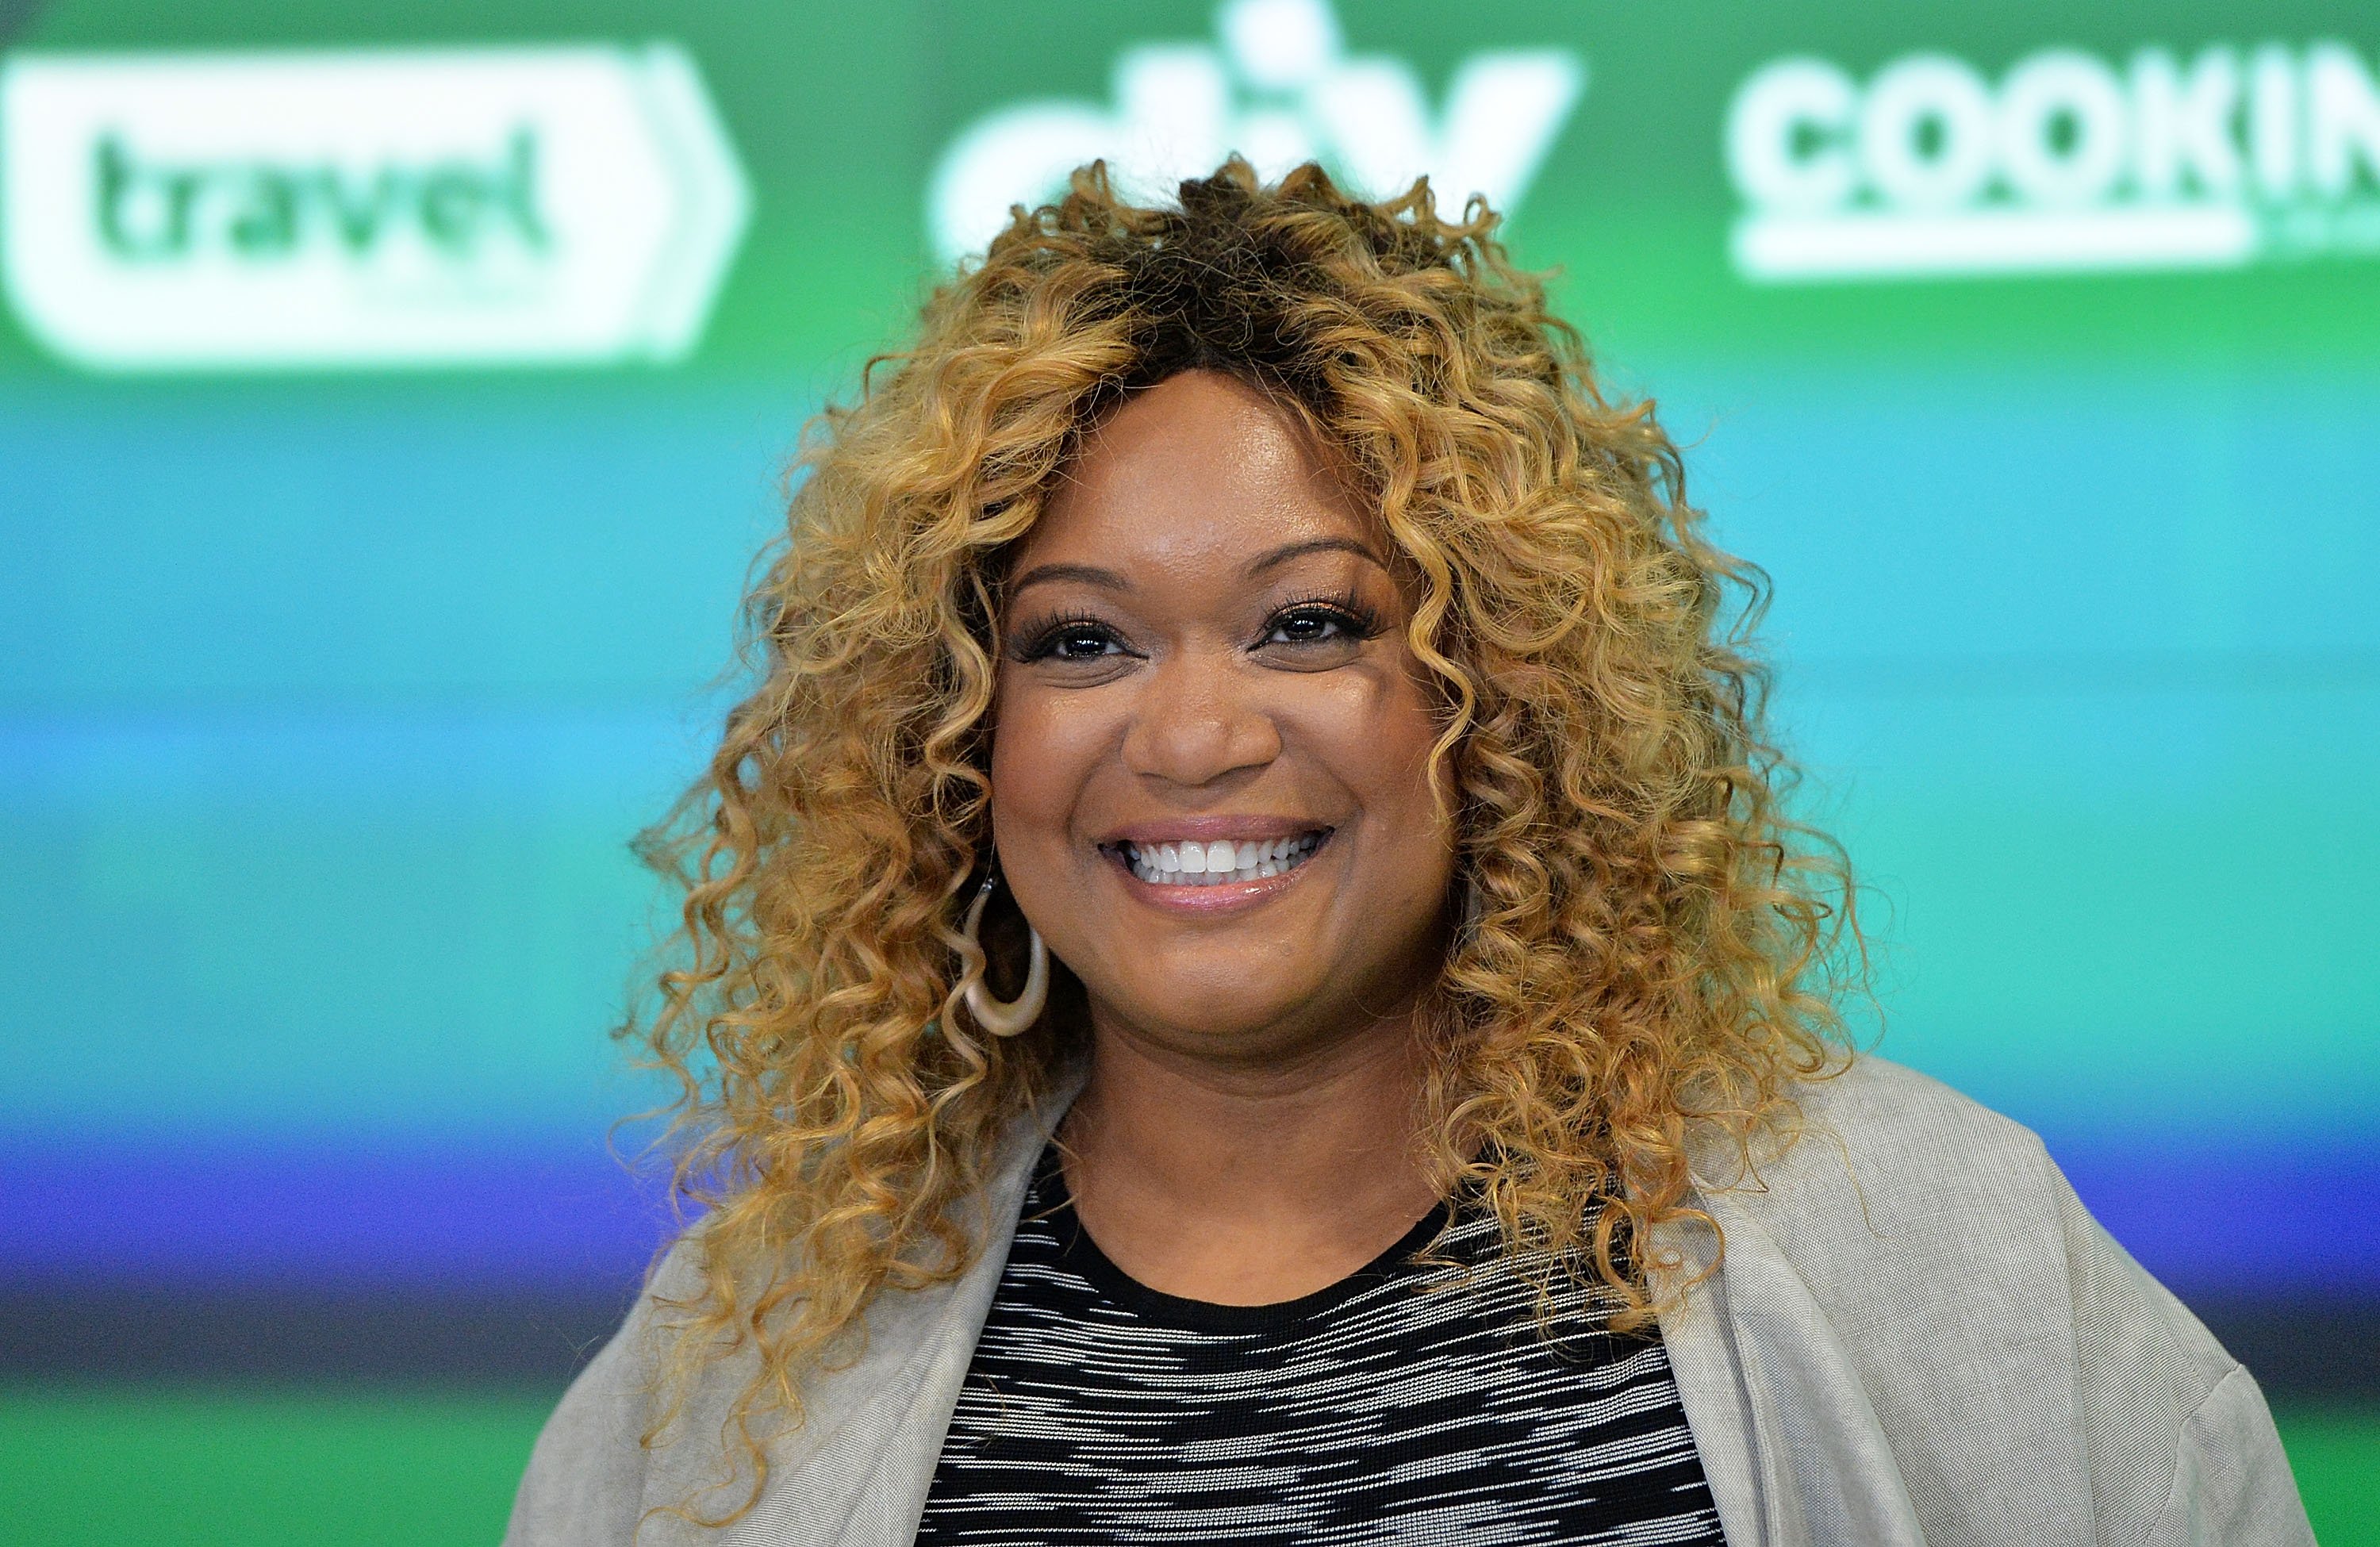 Sunny Anderson Worked as Broadcaster in the US Air Force before Fame